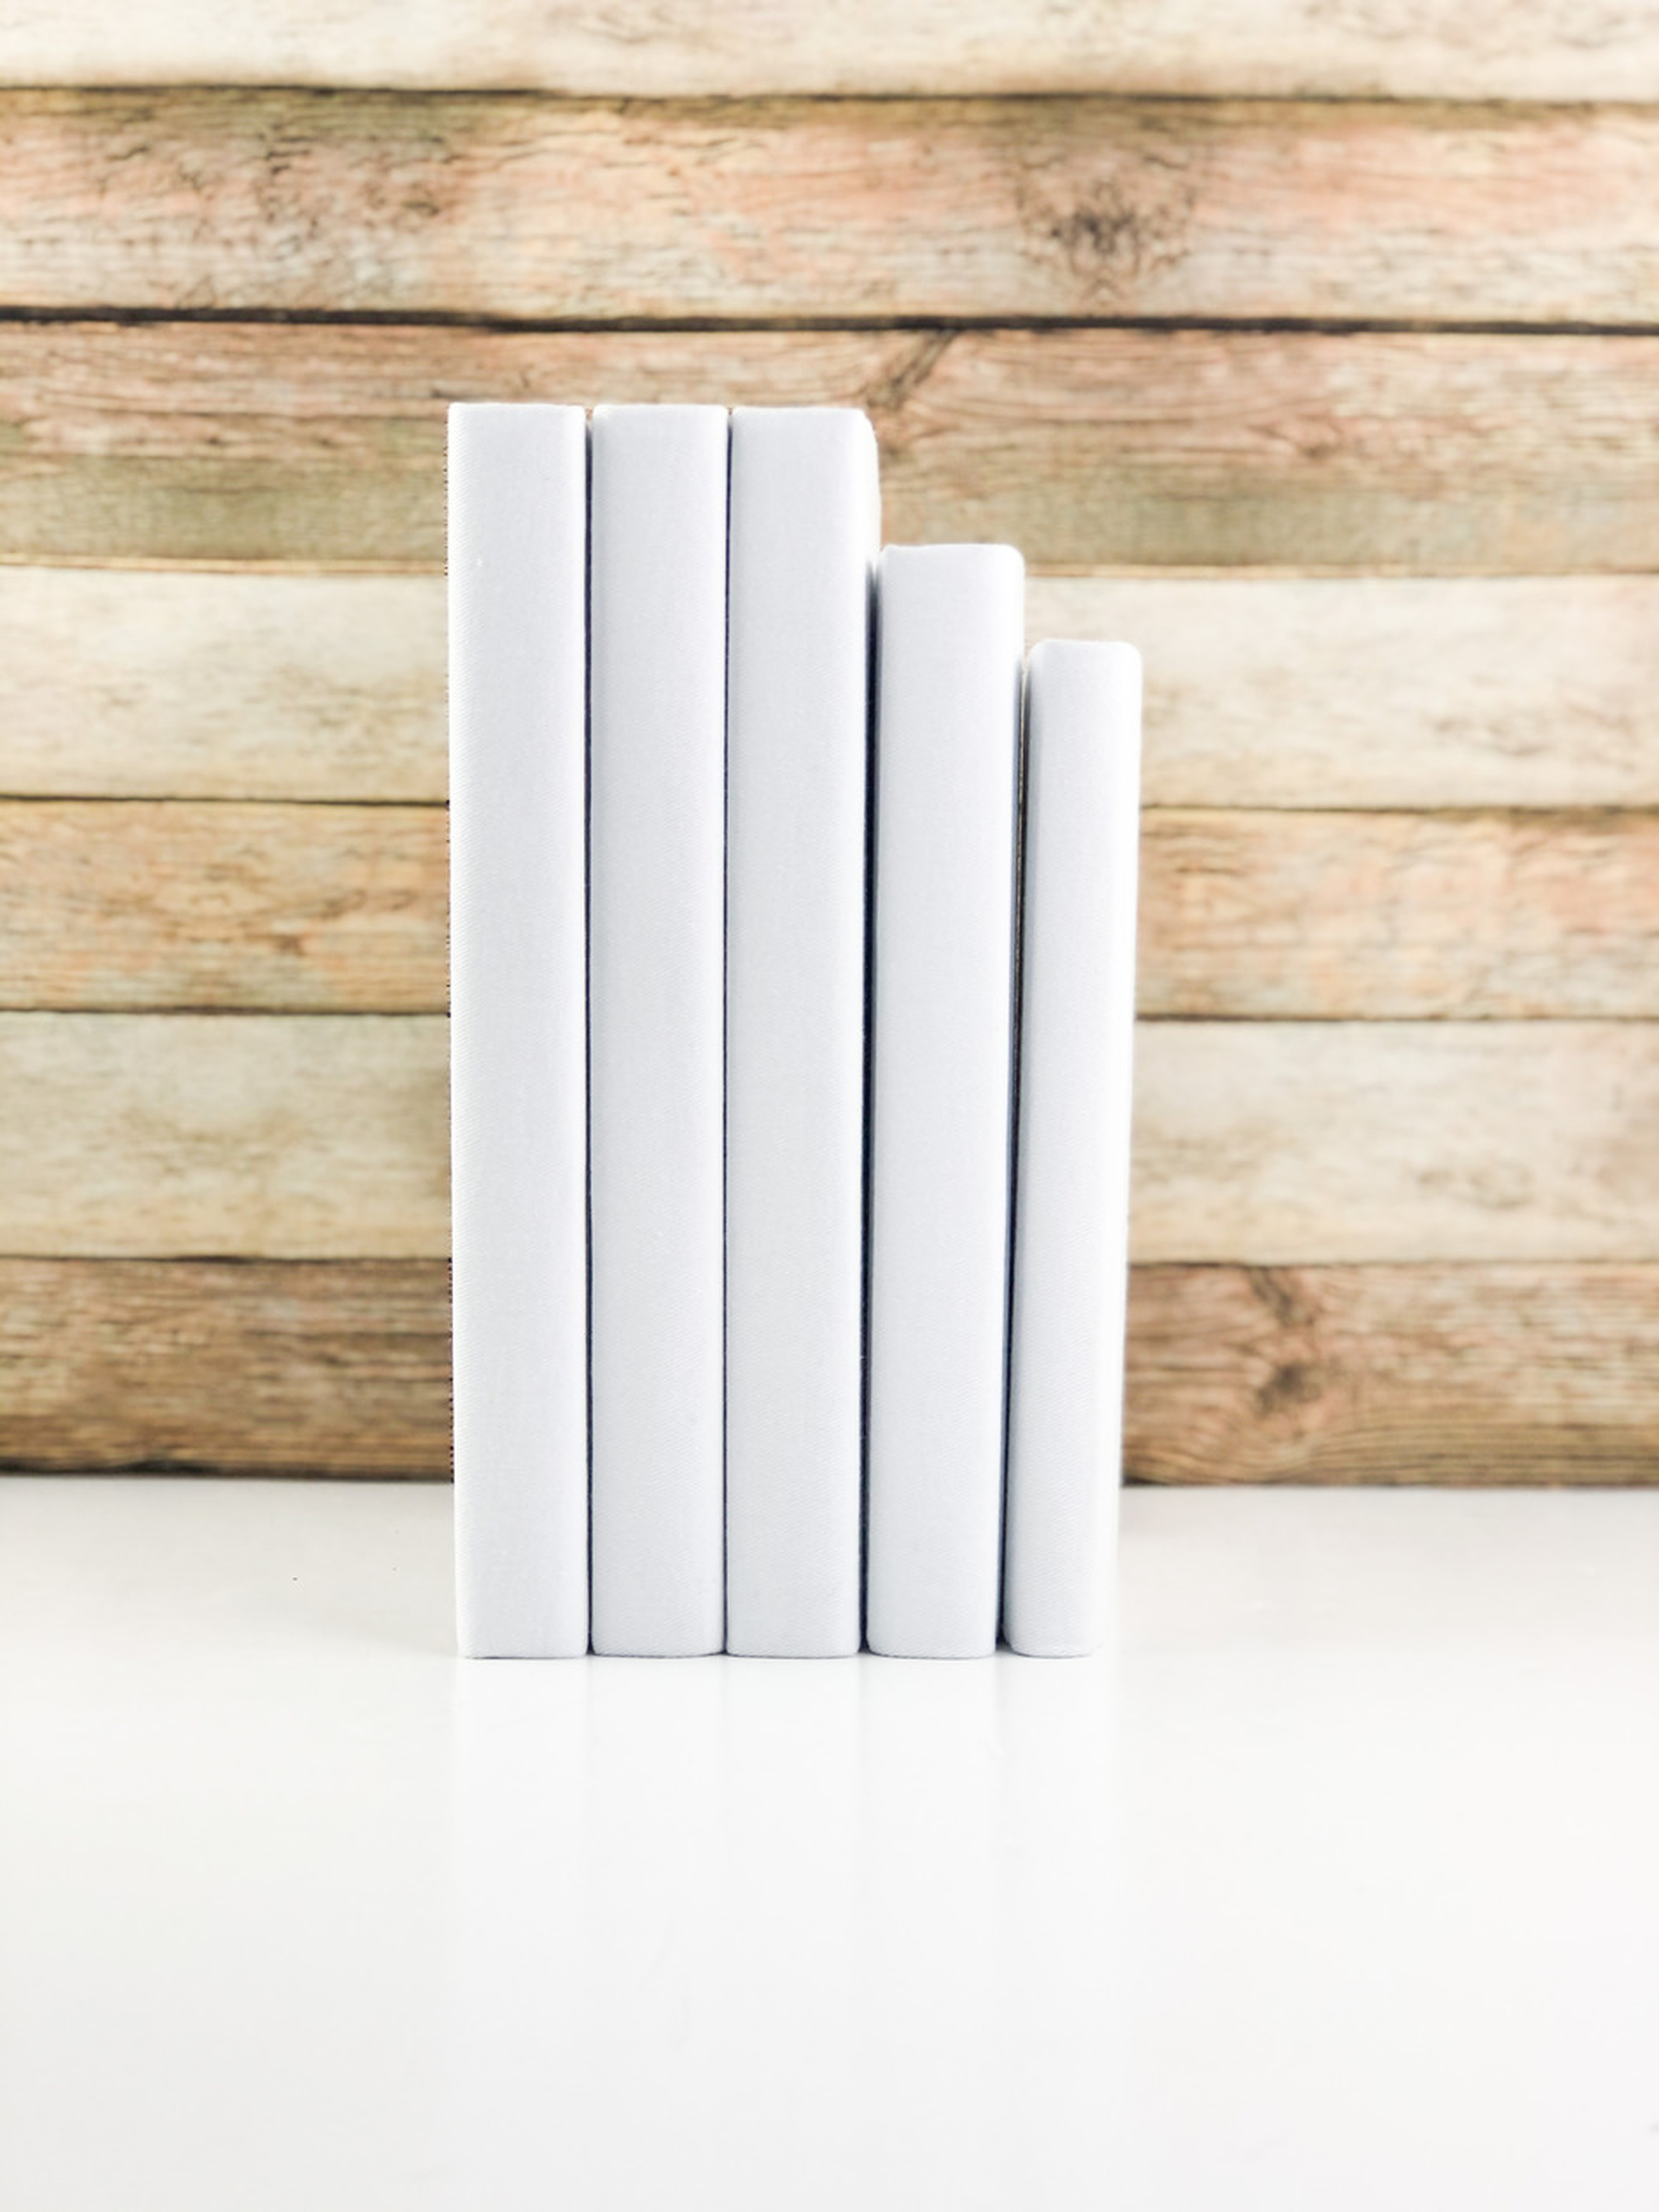 Decorative Books, Solid White, Set of 5 - Havenly Essentials